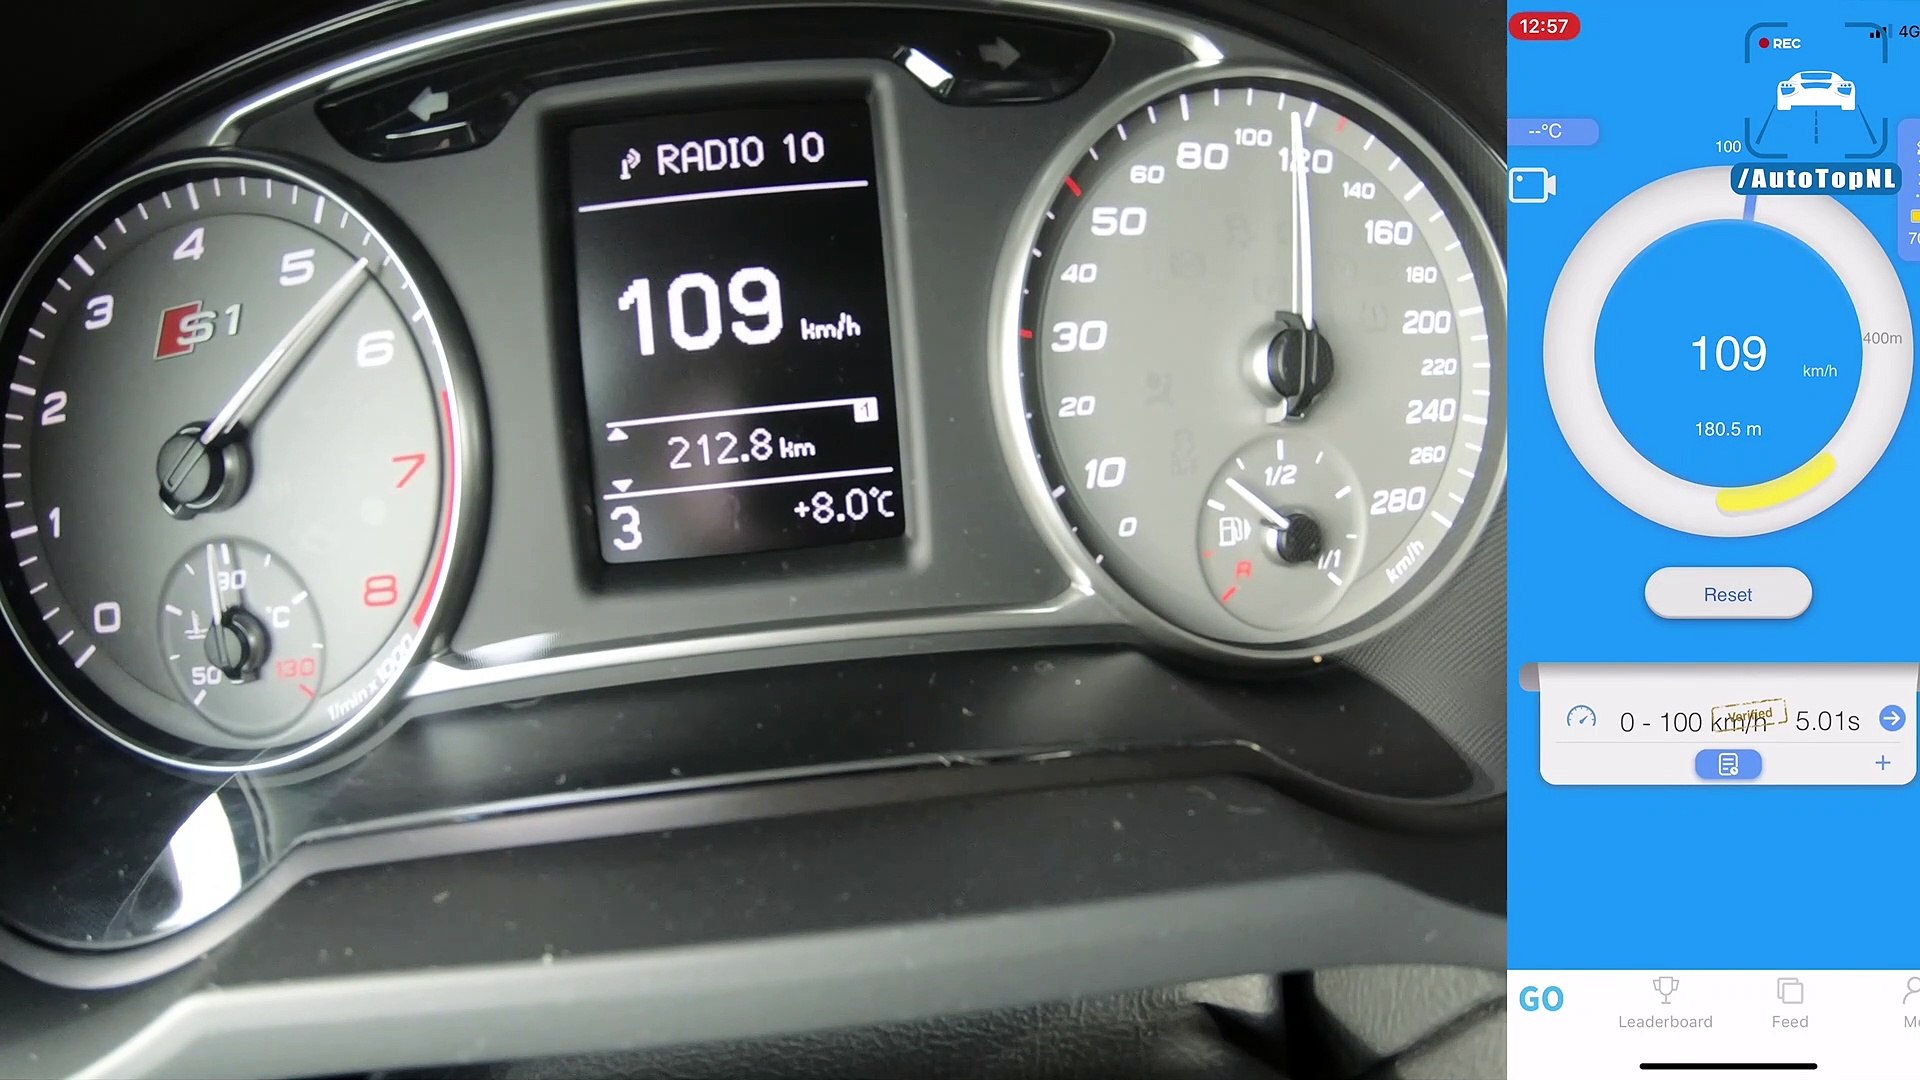 320HP AUDI S1 2.0 TFSI ACCELERATION & TOP SPEED 0-257km/h by AutoTopNL